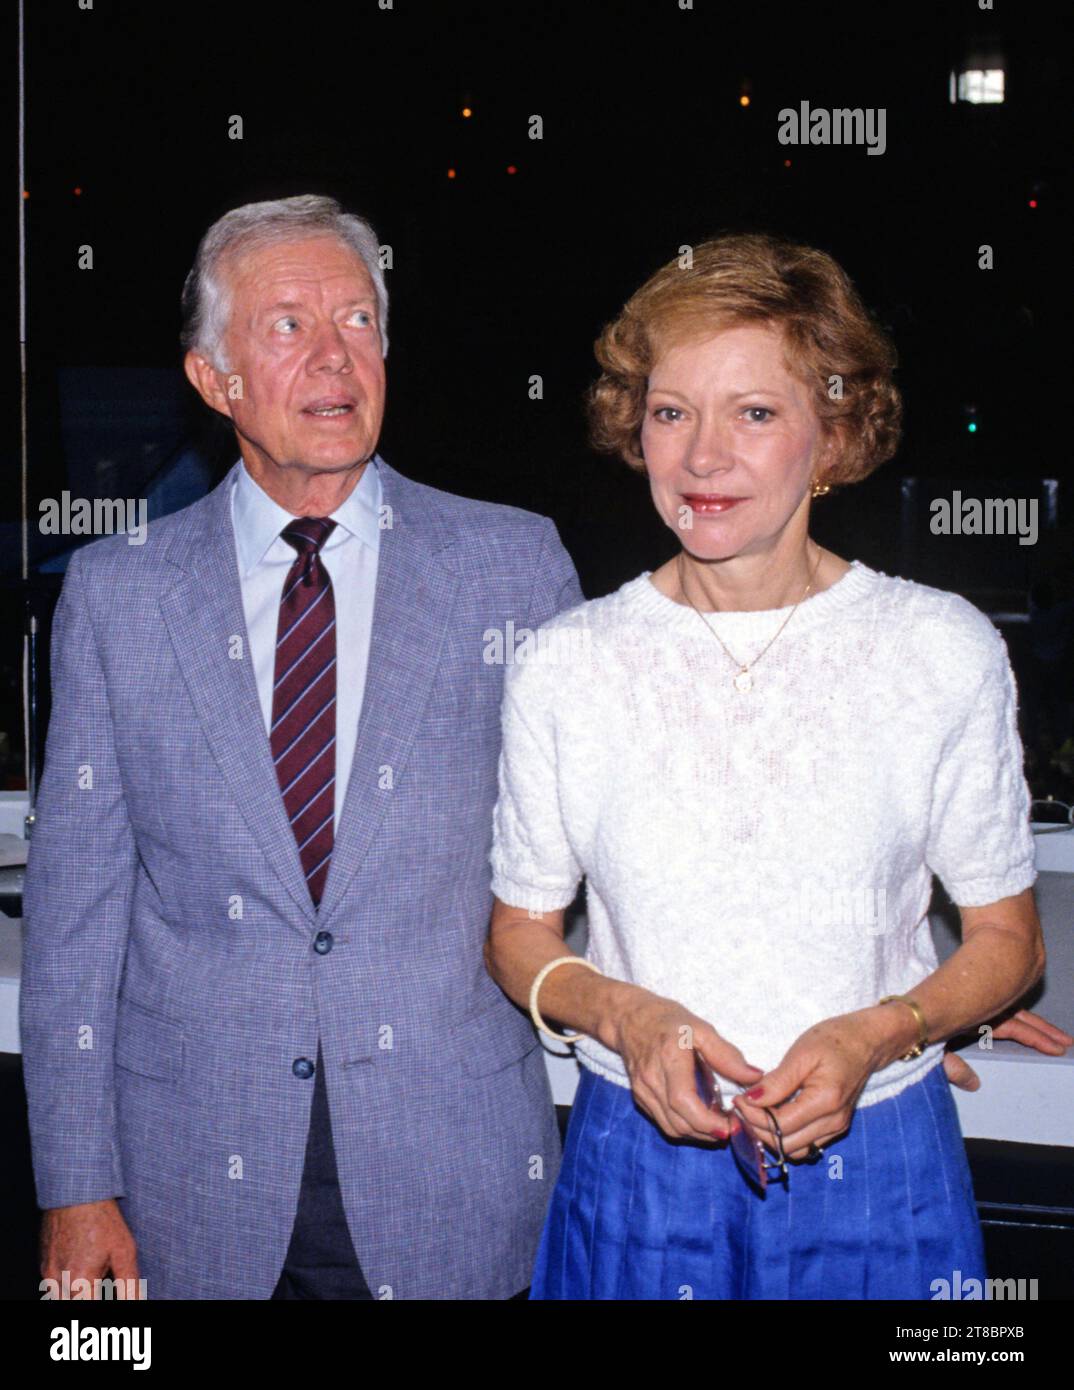 **FILE PHOTO** Rosalynn Carter Has Passed Away. Former United States President Jimmy Carter, accompanied by his wife, former first lady Rosalynn Carter, visits the Omni Coliseum in Atlanta, Georgia prior to his addressing the 1988 Democratic National Convention on July 18, 1988. Copyright: xArniexSachsx Credit: Imago/Alamy Live News Stock Photo